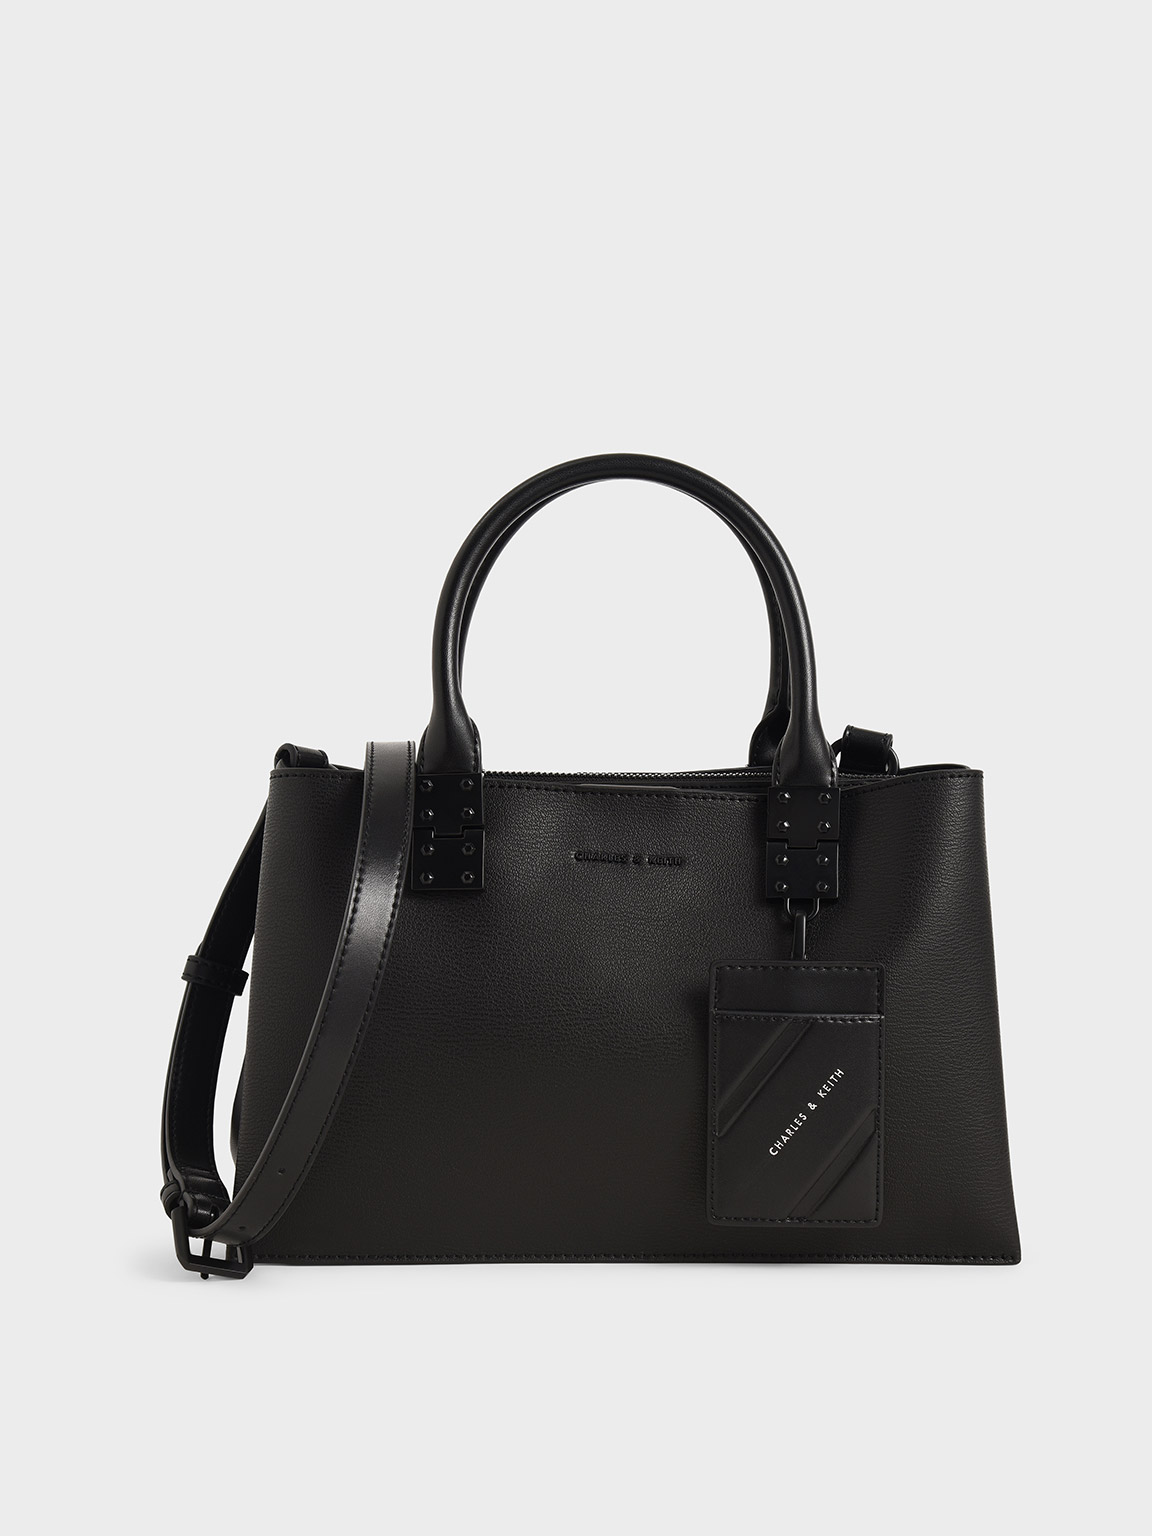 Ultra Matte Black Double Top Handle Structured Bag - CHARLES 